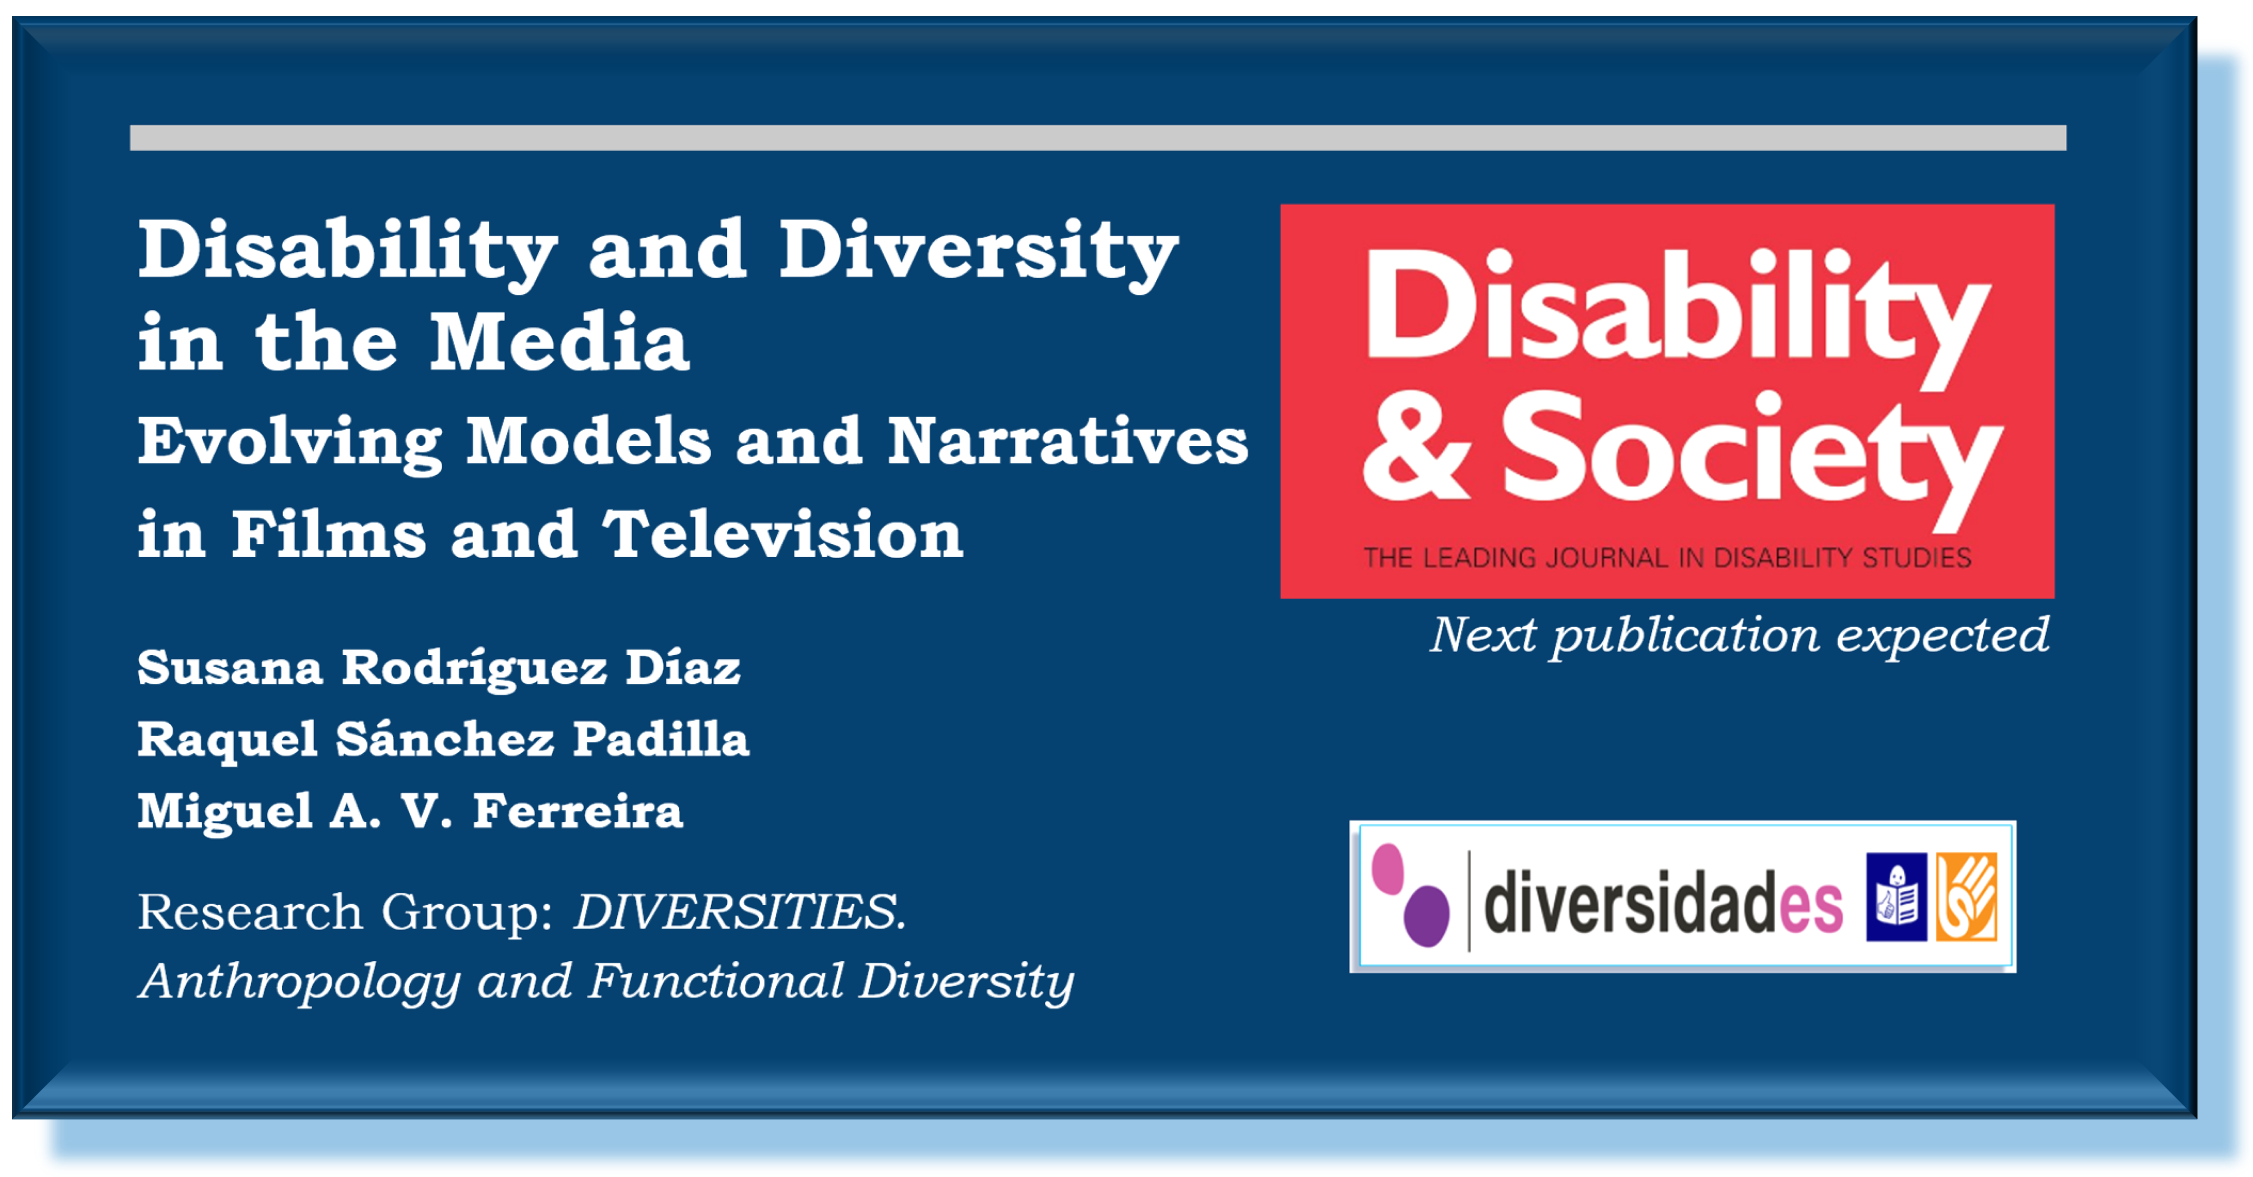 Disability and Functional Diversity